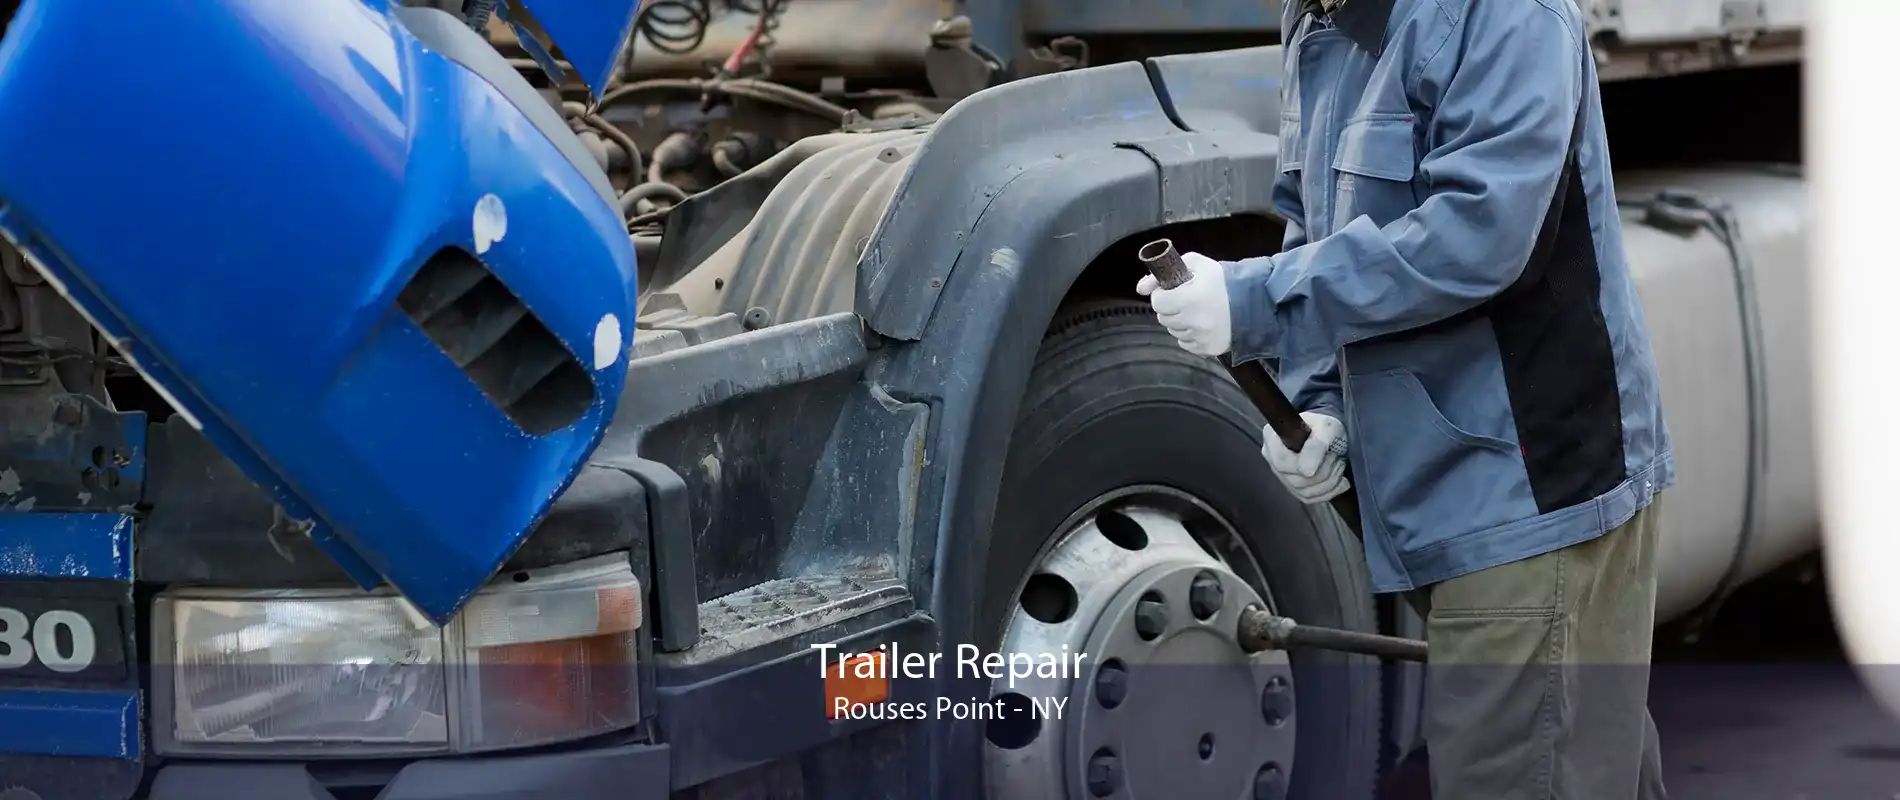 Trailer Repair Rouses Point - NY